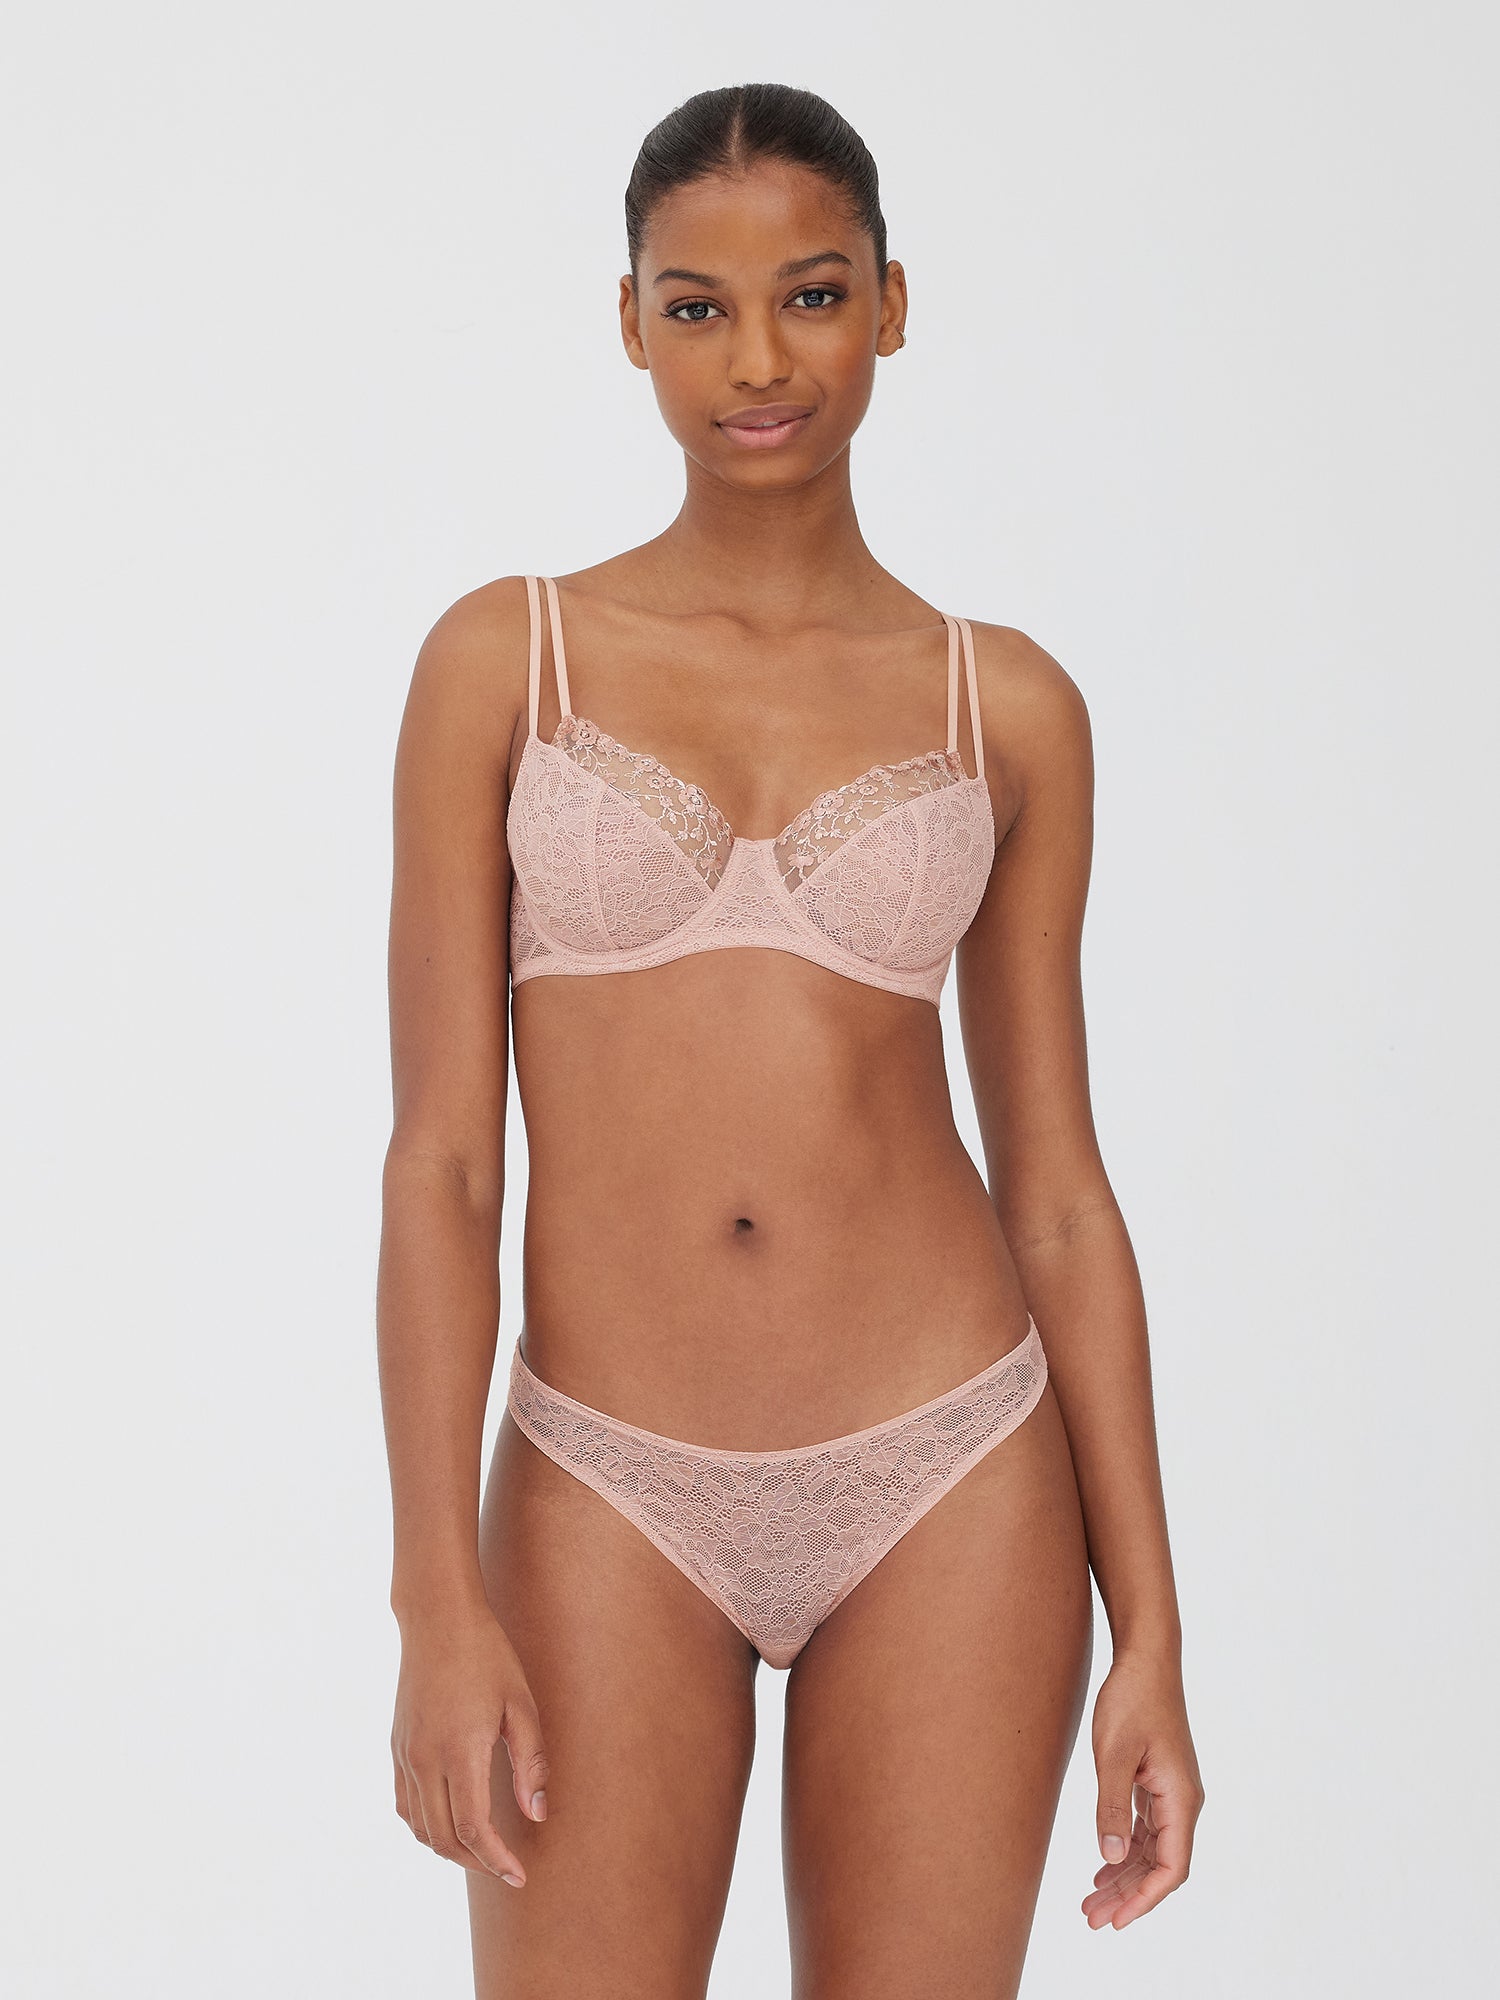 Soft Pink Lace and Tulle Detailed Unpadded Bra